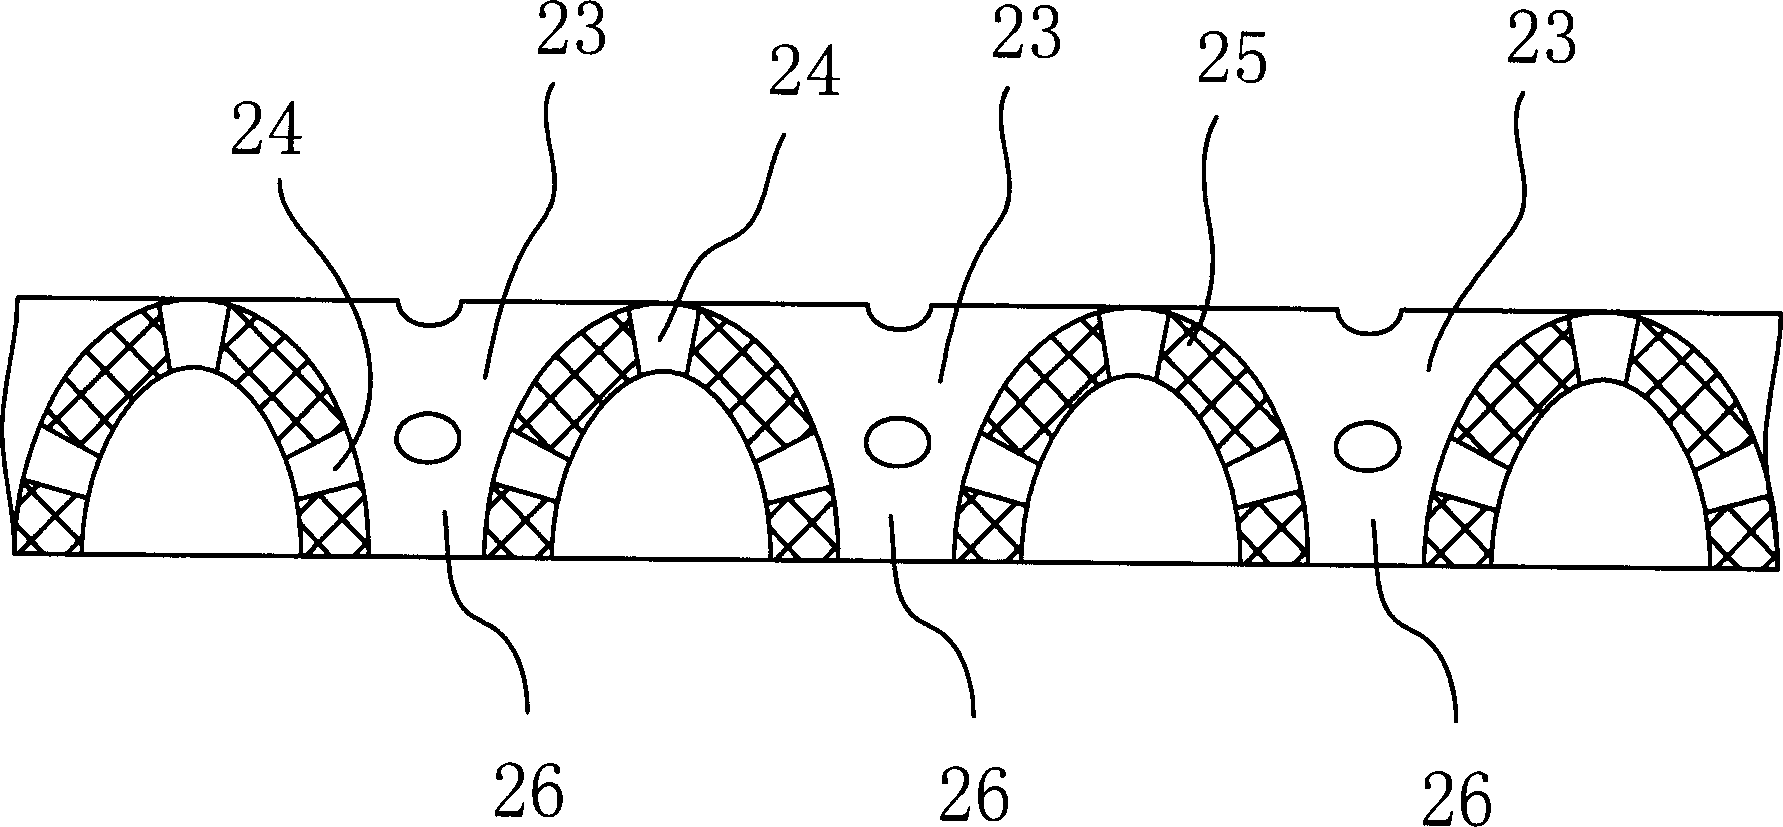 Secondary mesh combined plastic punched film and method for making same